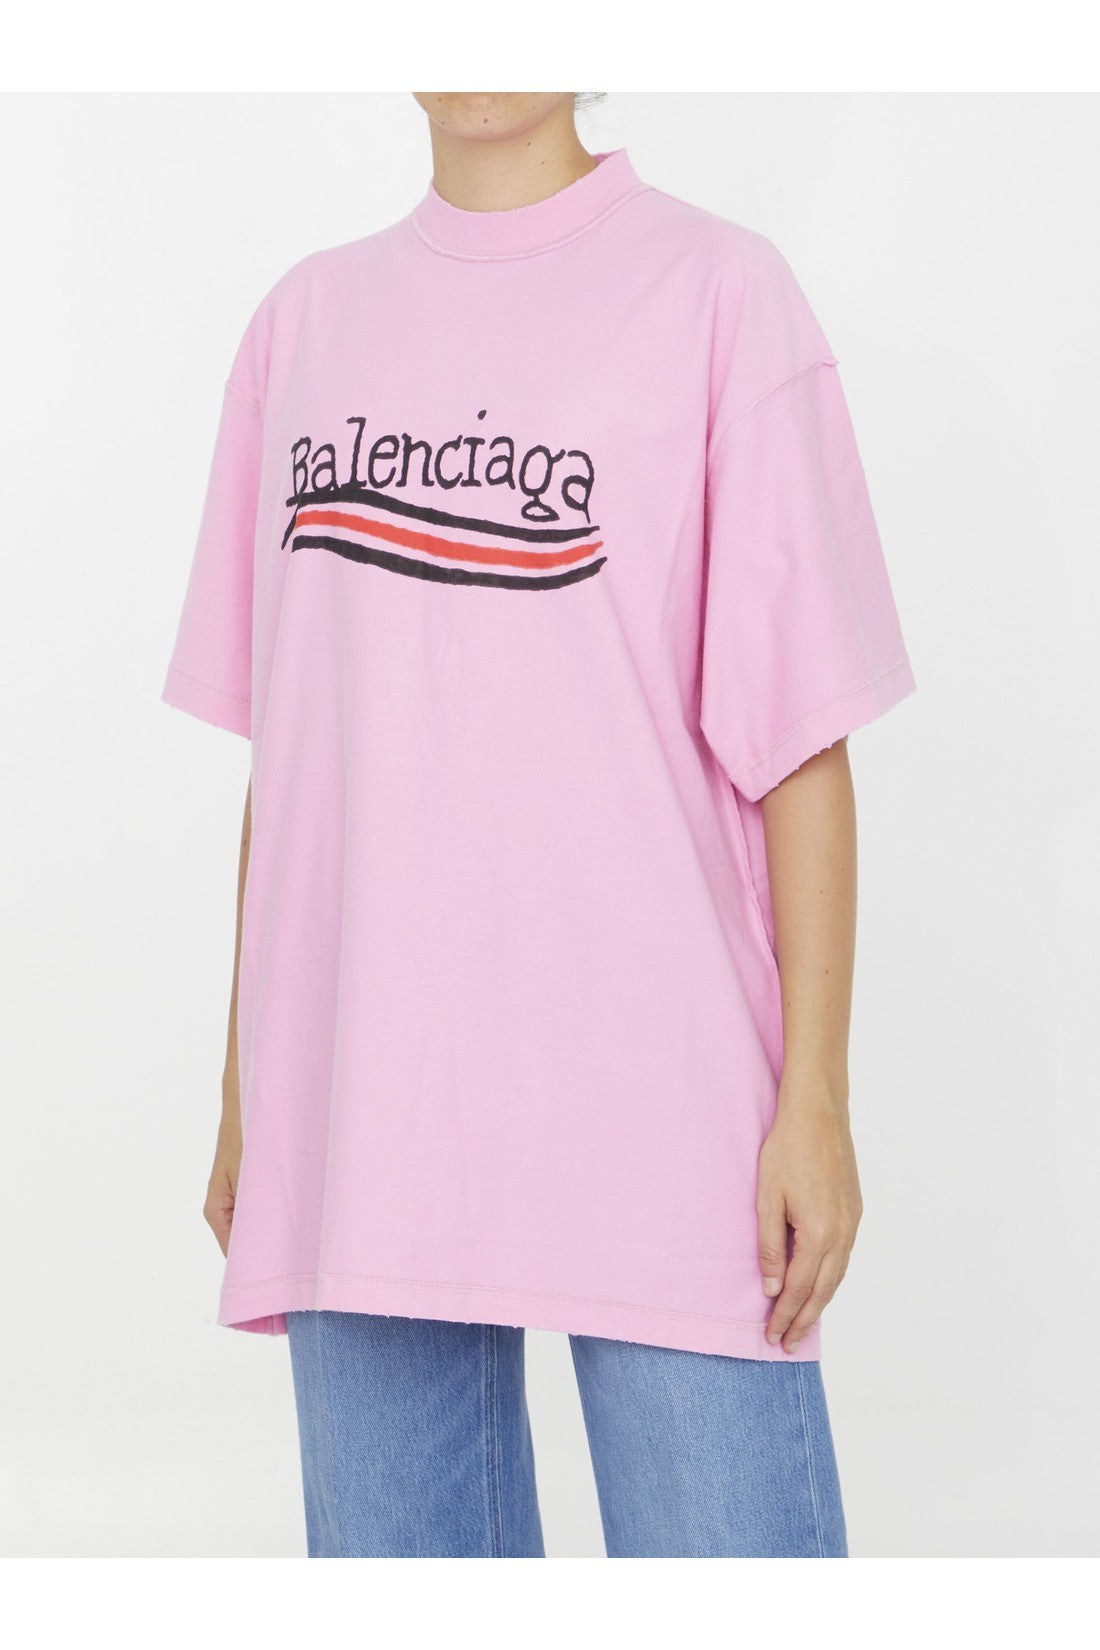 BALENCIAGA-OUTLET-SALE-Logo-t-shirt-Shirts-01-PINK-ARCHIVE-COLLECTION-2.jpg